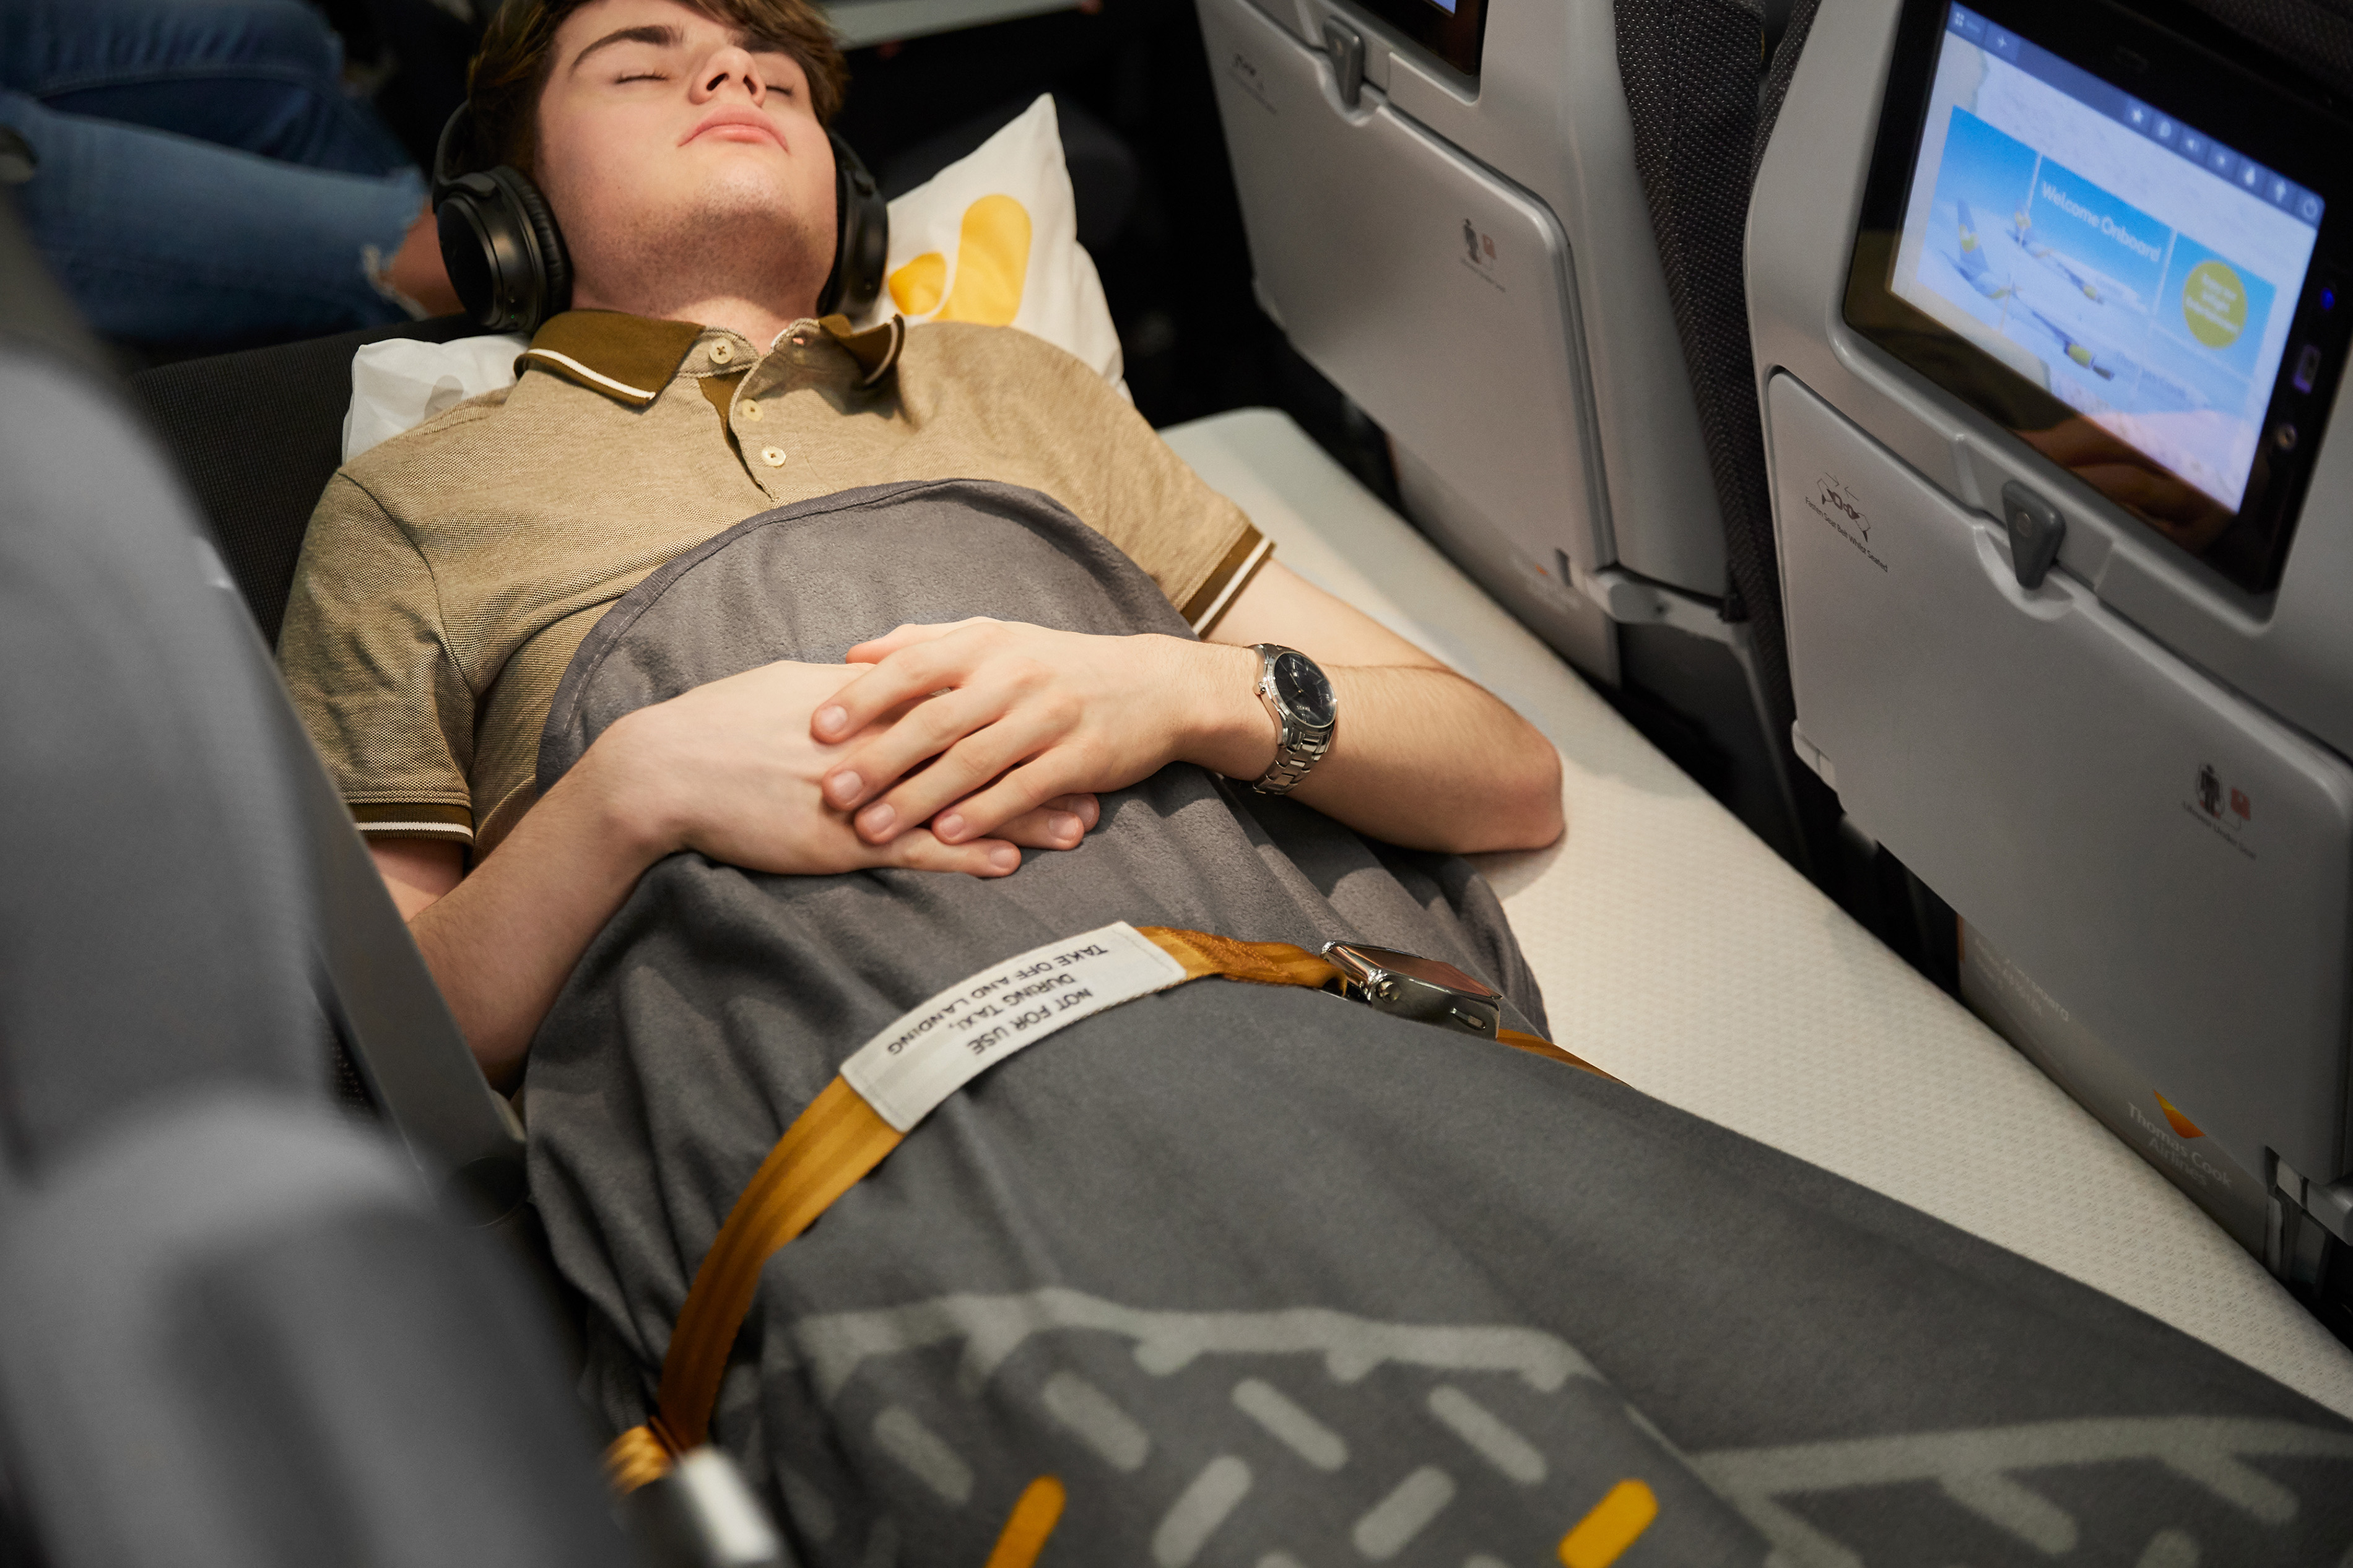 The extension belt enables the passenger to continue lying down when the fasten seatbelt signal is given